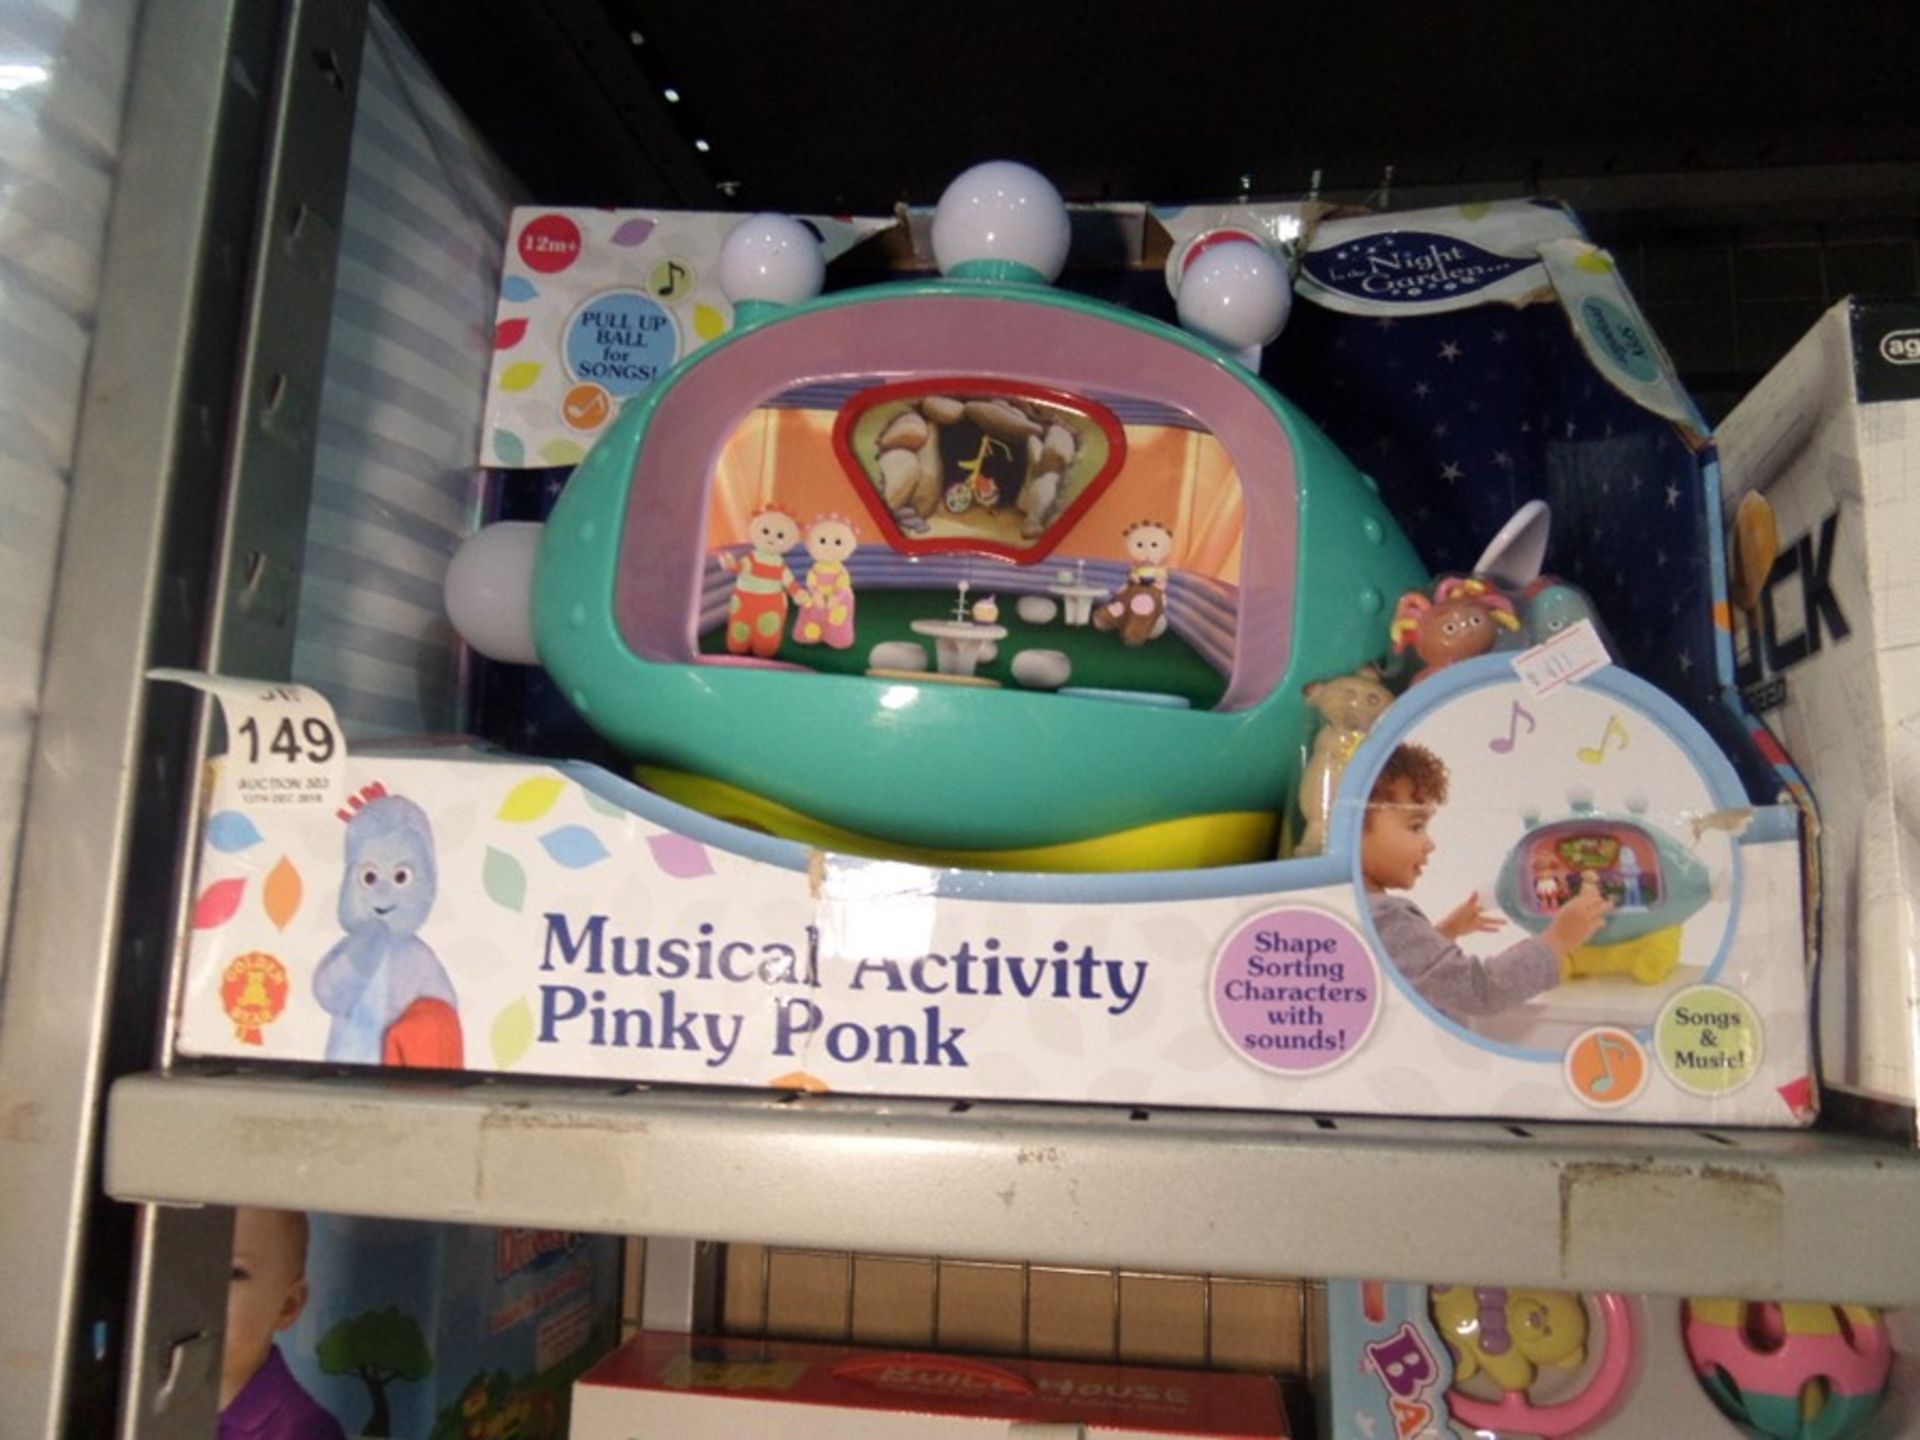 PINKY PONK MUSICAL ACTIVITY TOY SHOP CLEARANCE